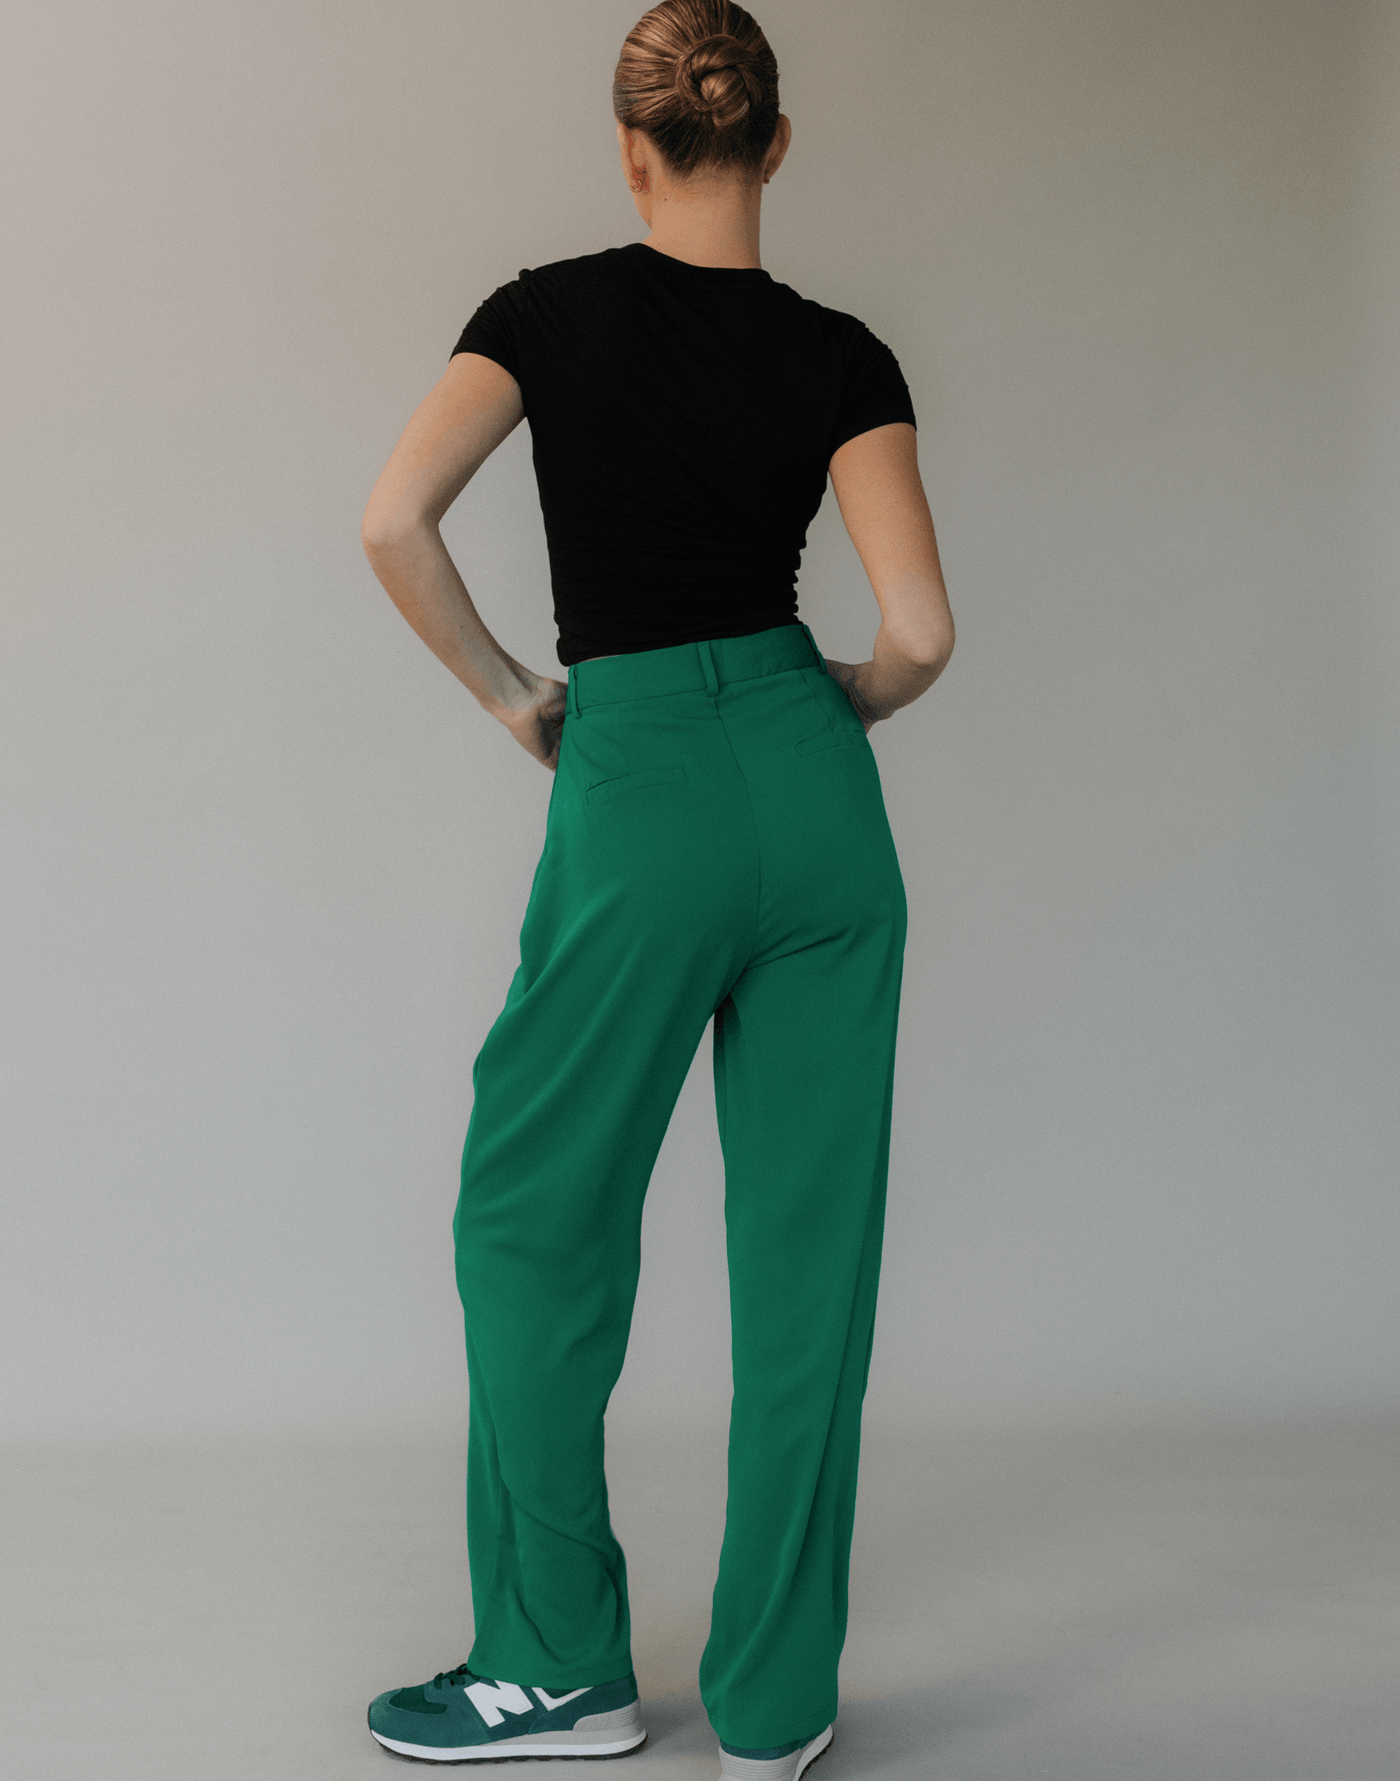 Green Trousers  Green trousers Fashion clothes women Clothes